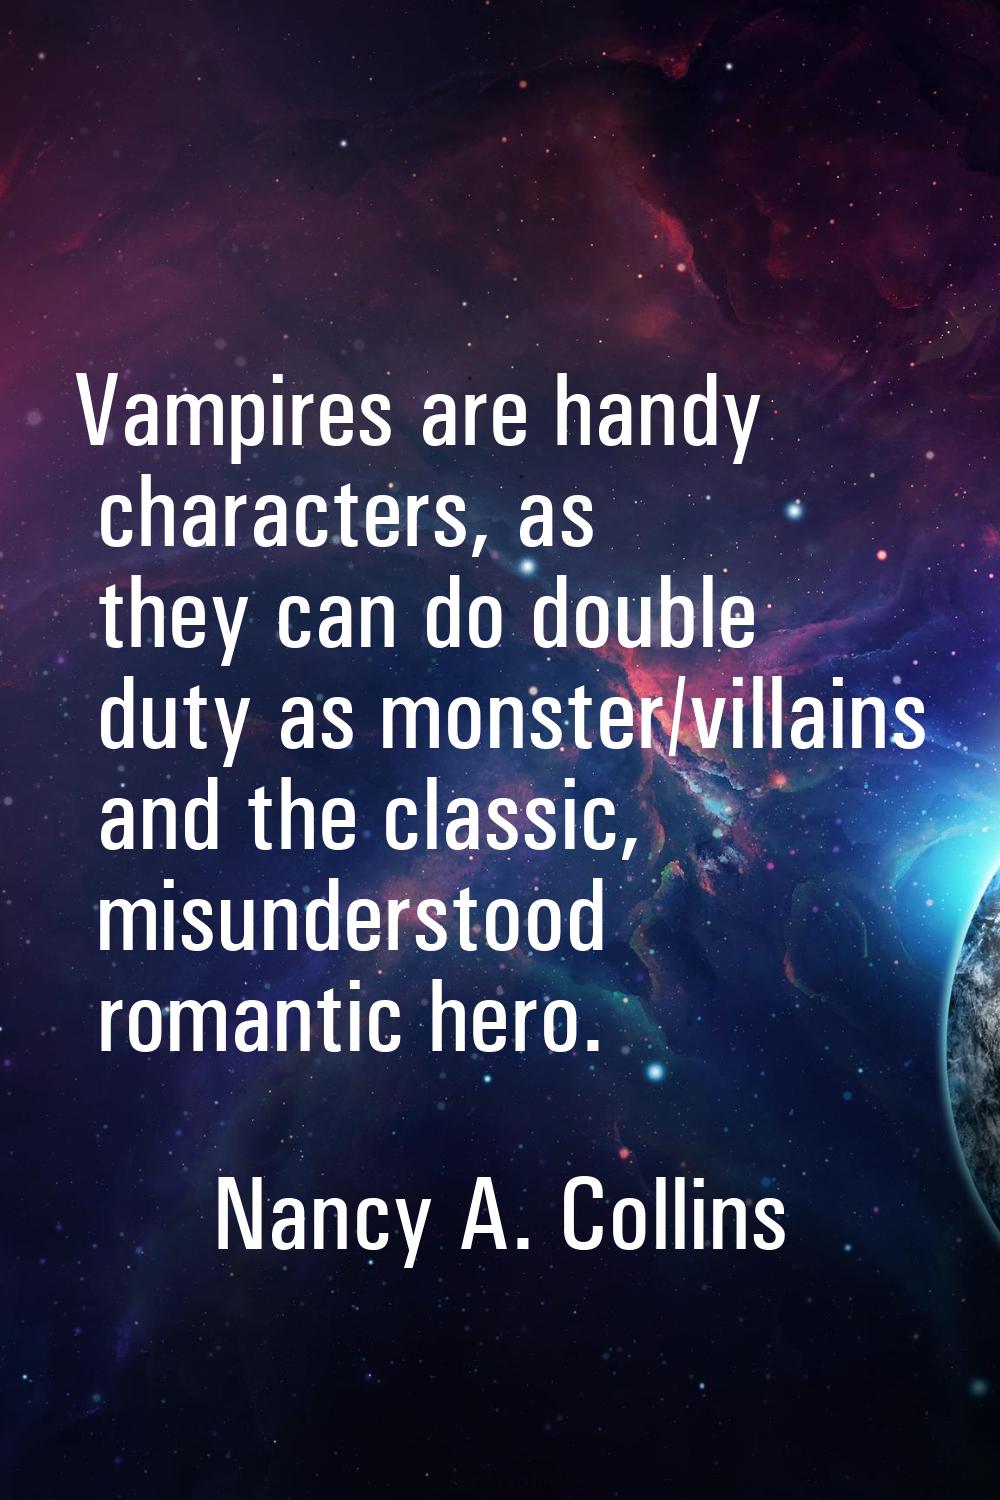 Vampires are handy characters, as they can do double duty as monster/villains and the classic, misu